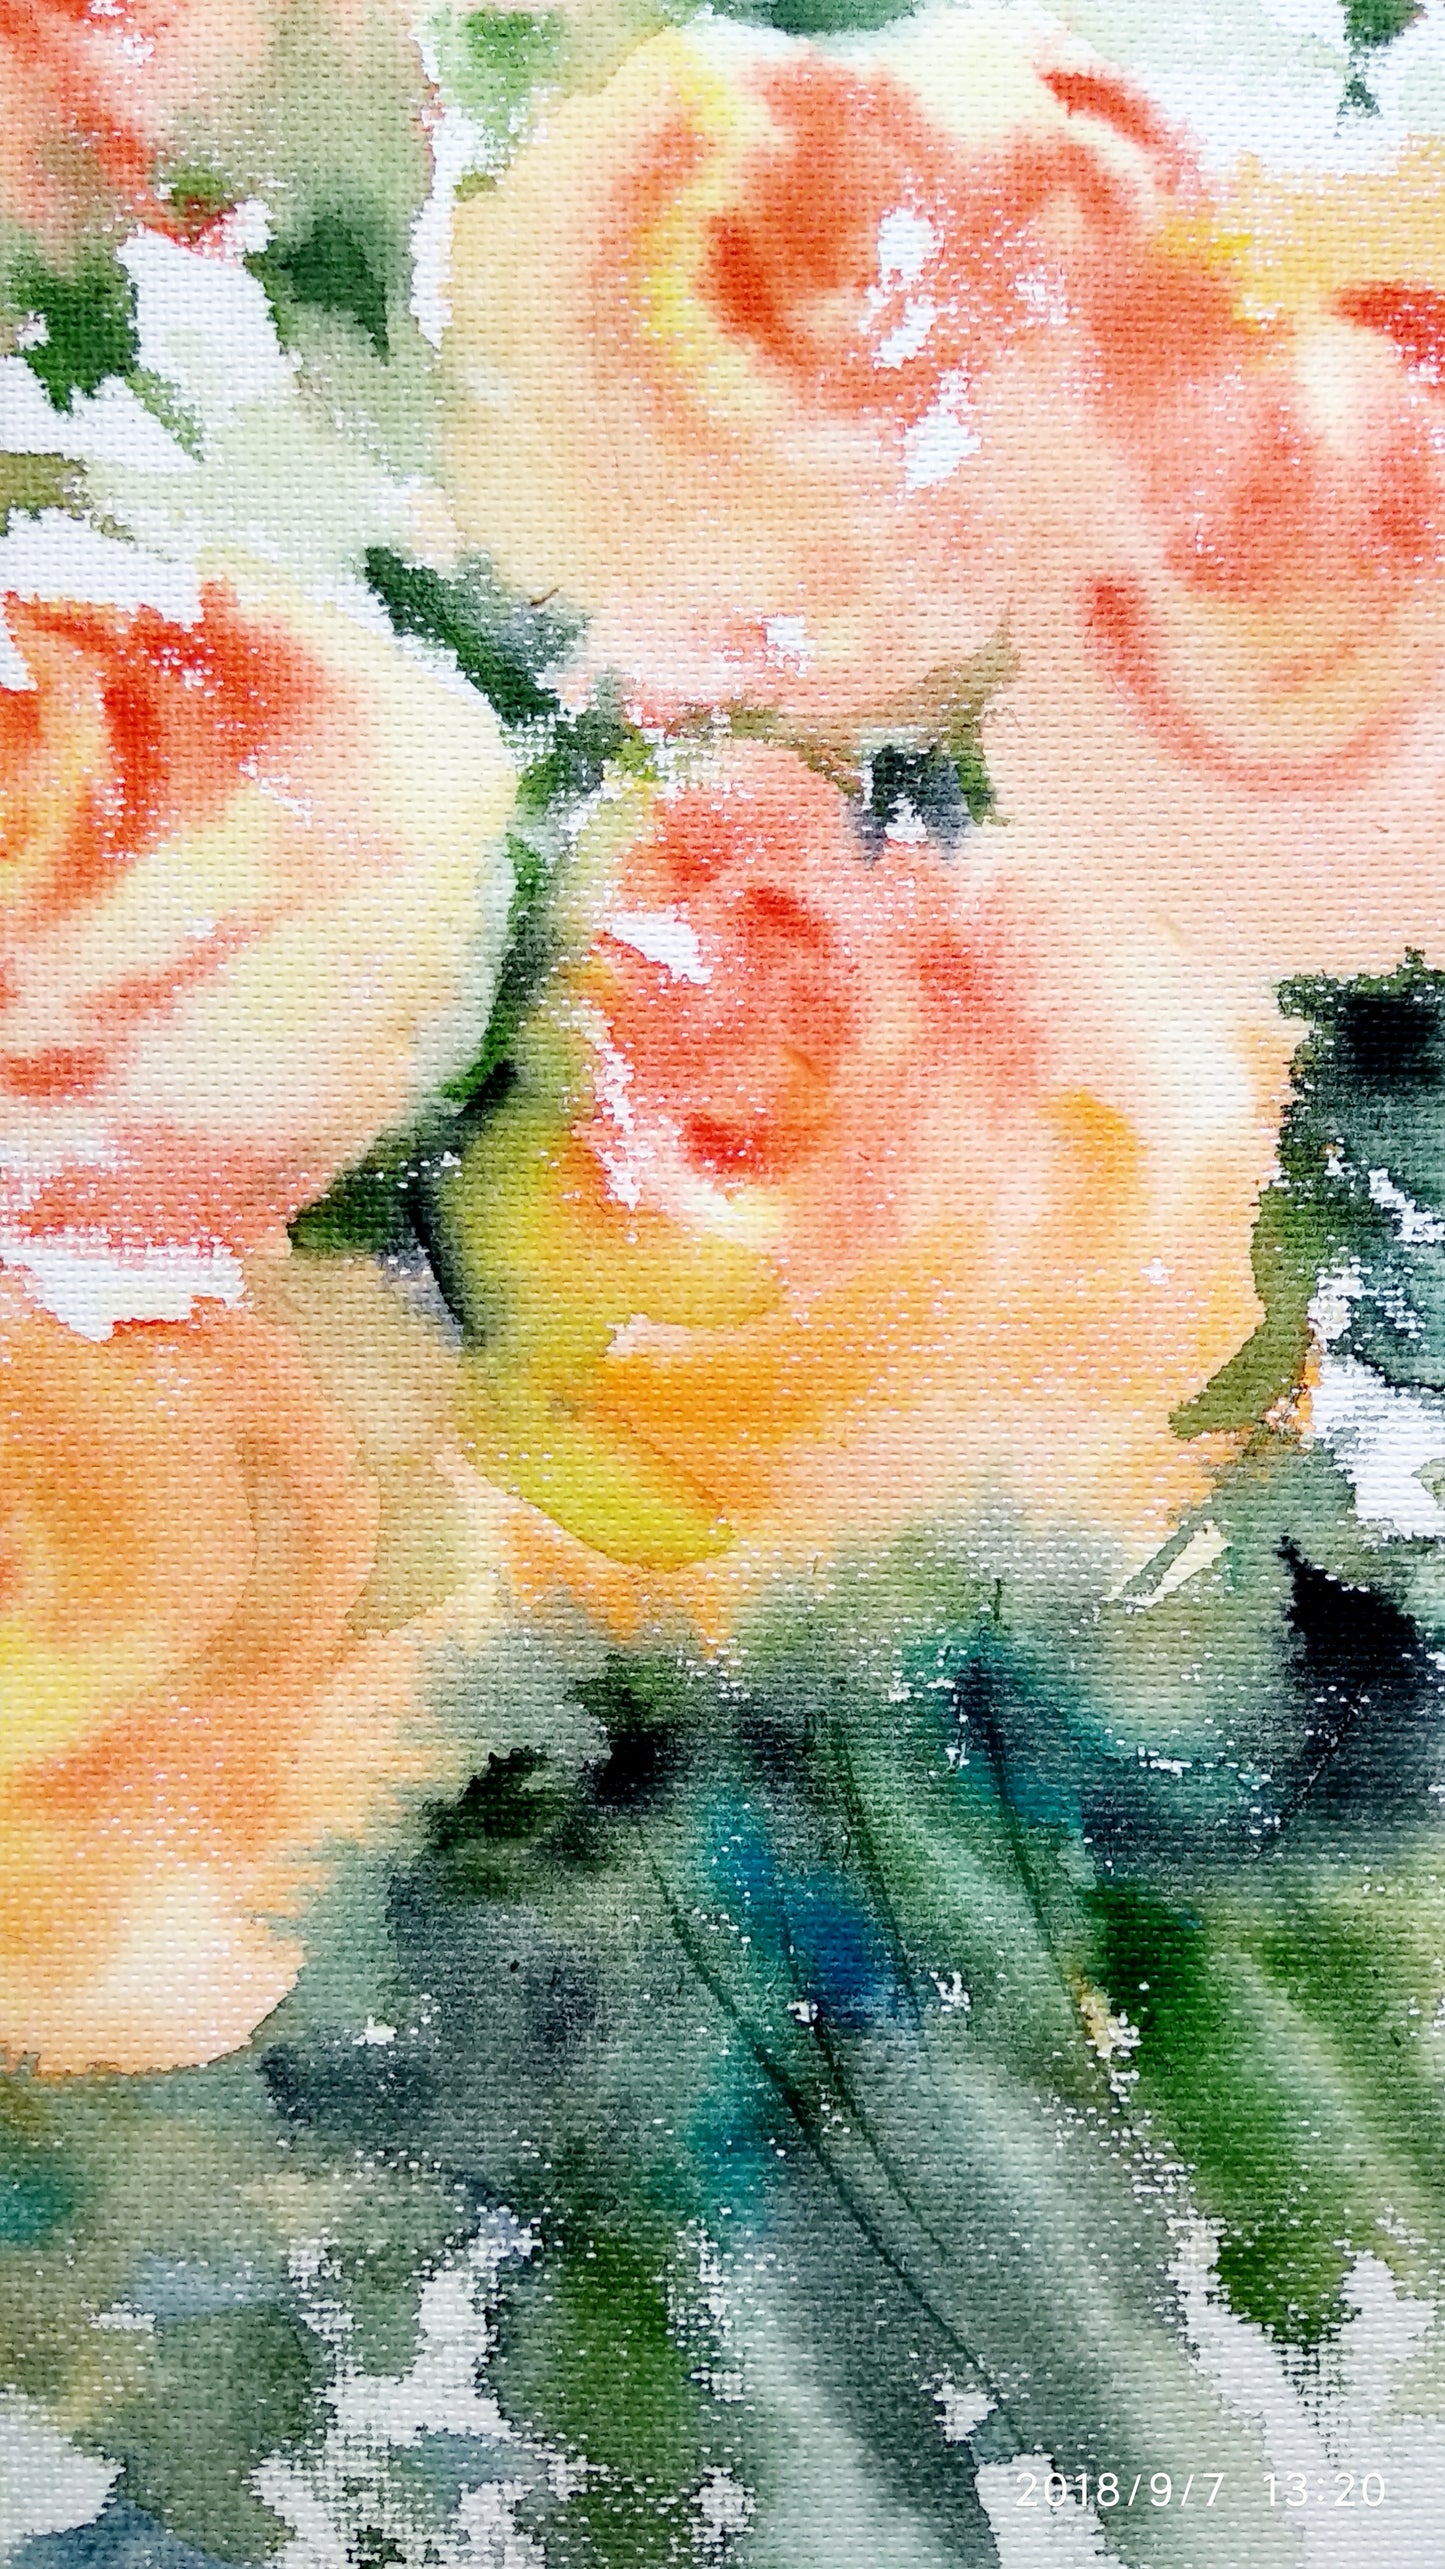 close-up view of Bouquet of cream and orange roses, watercolor painting